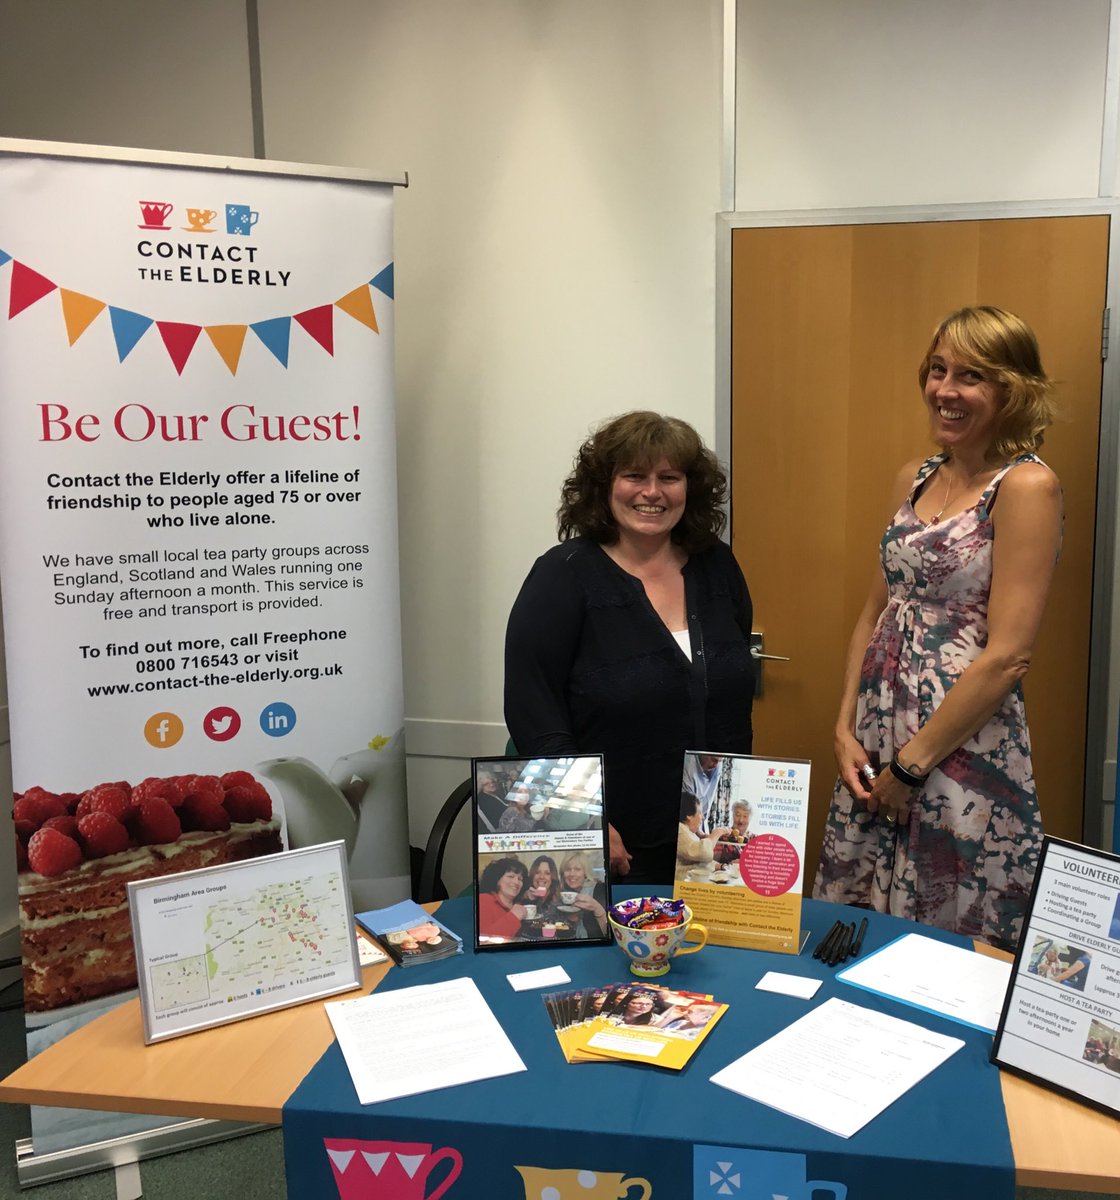 Tracy & Kath are all set up @BVSC Digbeth #Birmingham for the #VolunteerFair 

Come along all you lovely  #BrumVolunteers & find out how you could help with our ‘Contact The Elderly’ friendship groups for the over 75’s - driving or hosting.